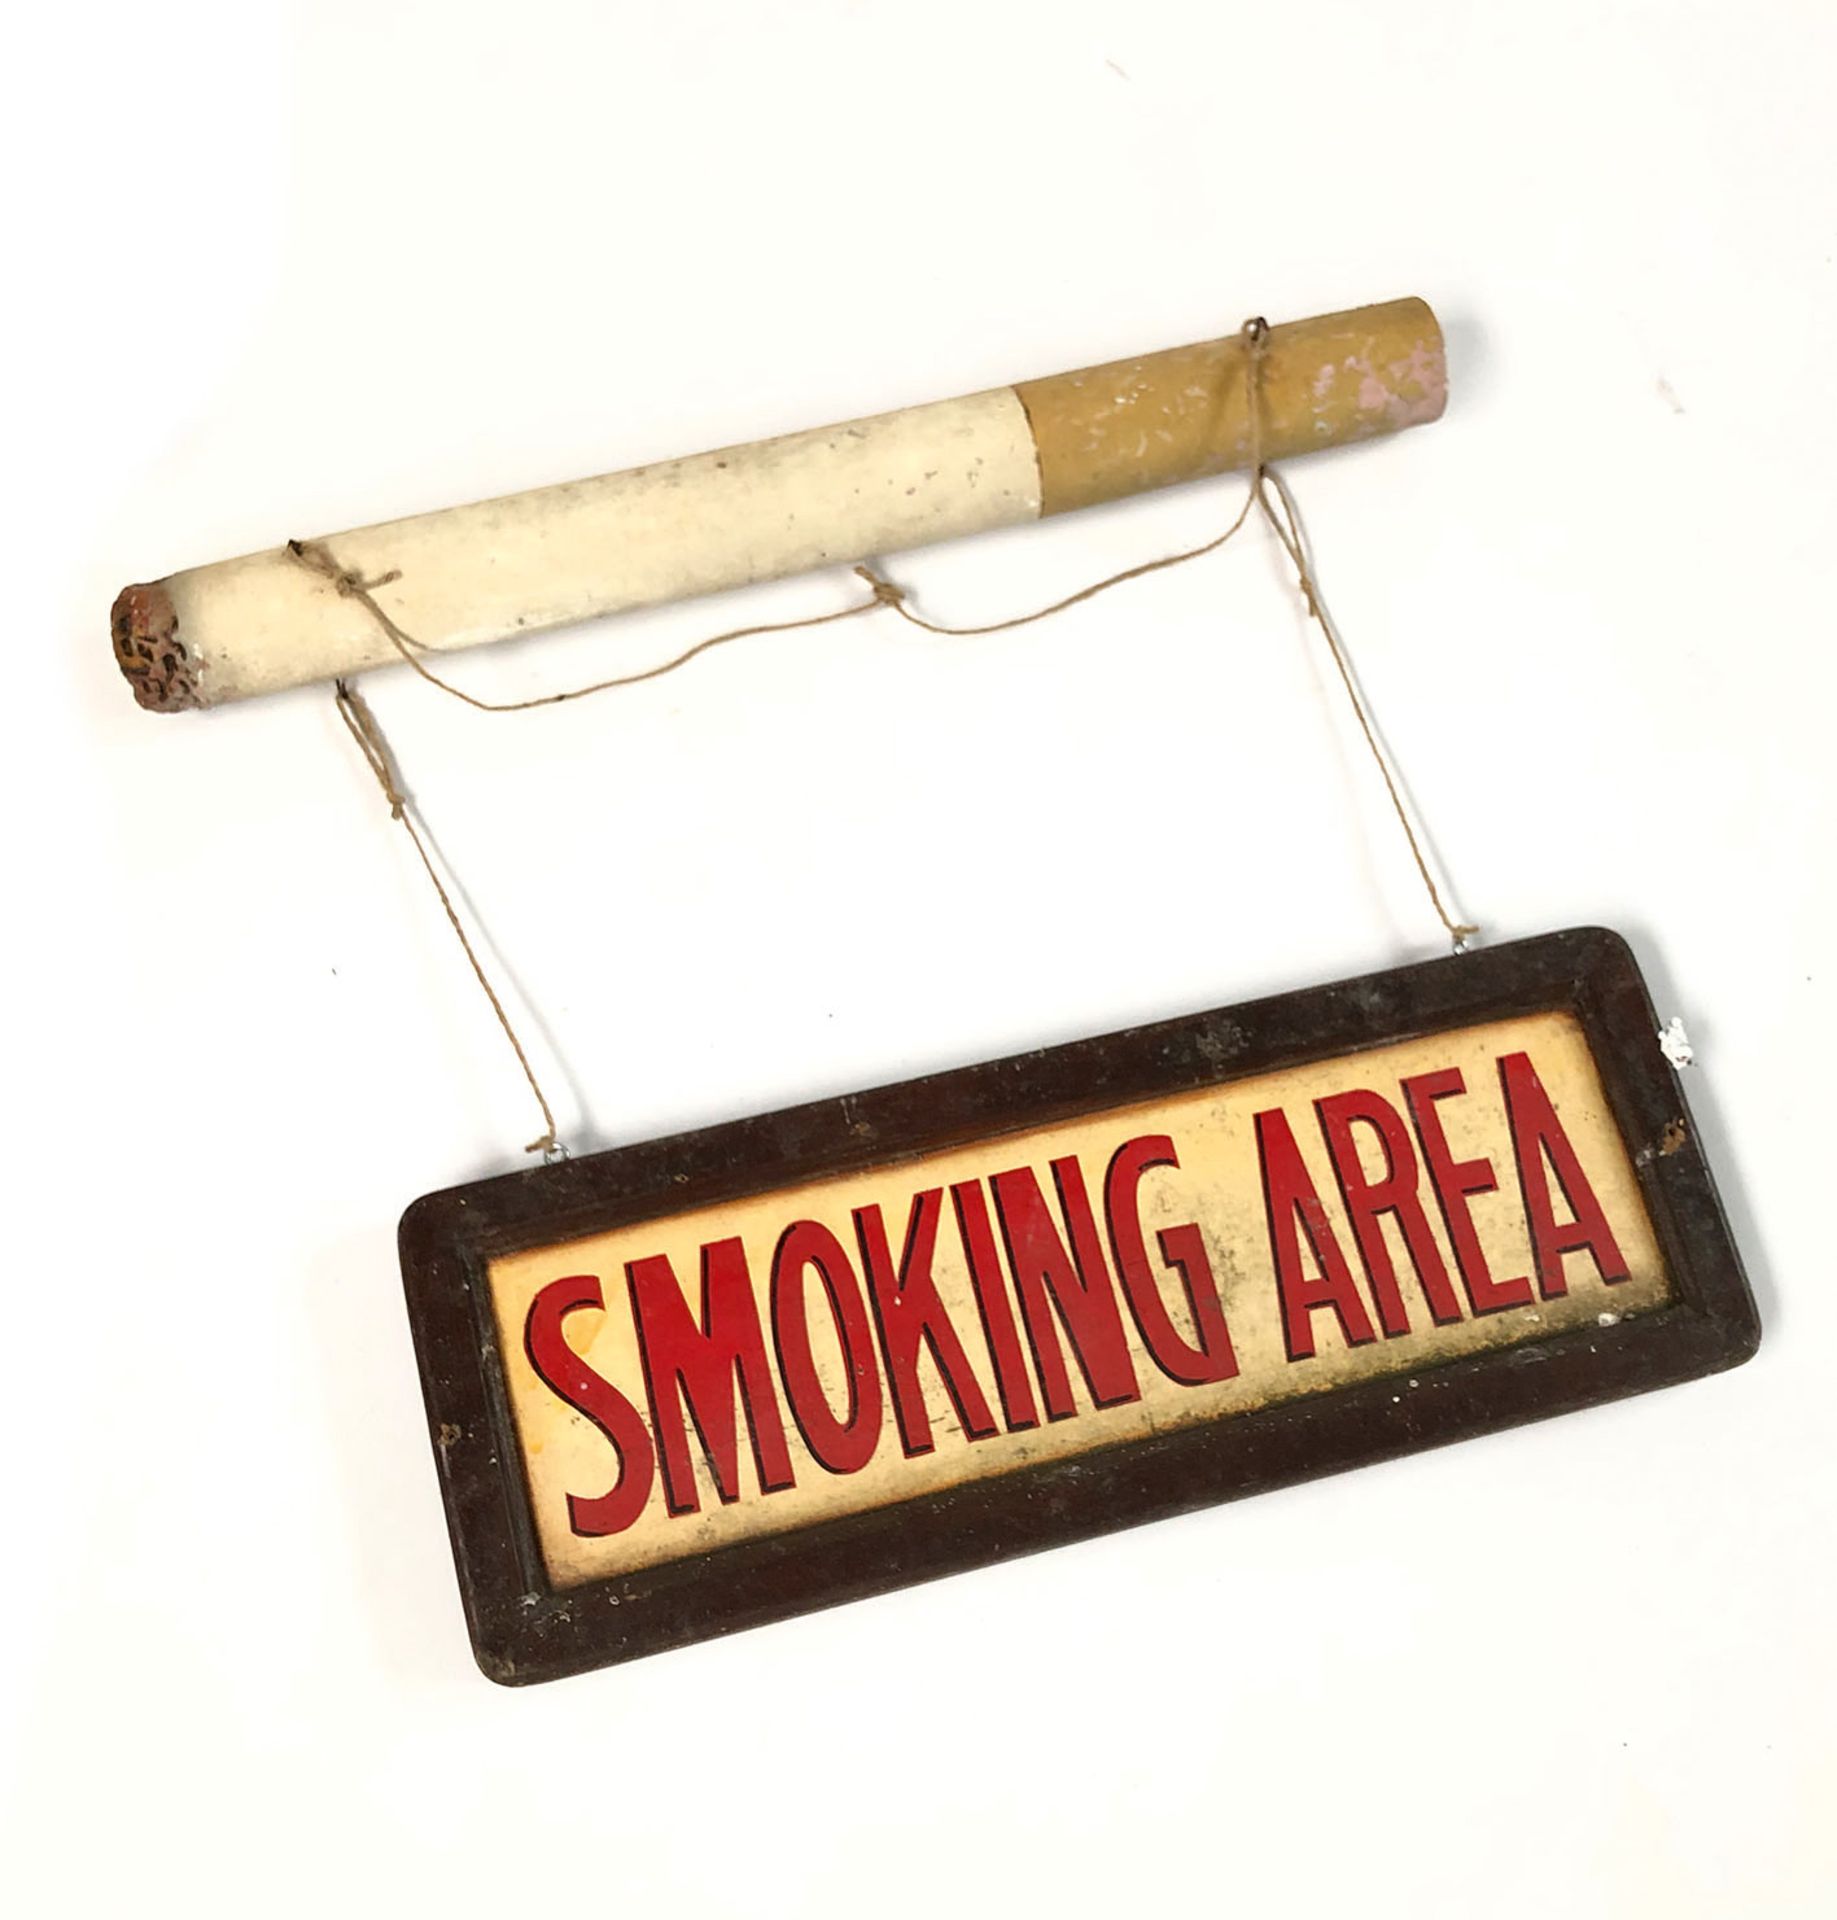 2 two-sided signboards - No Smoking, Smoking Area - Image 2 of 3